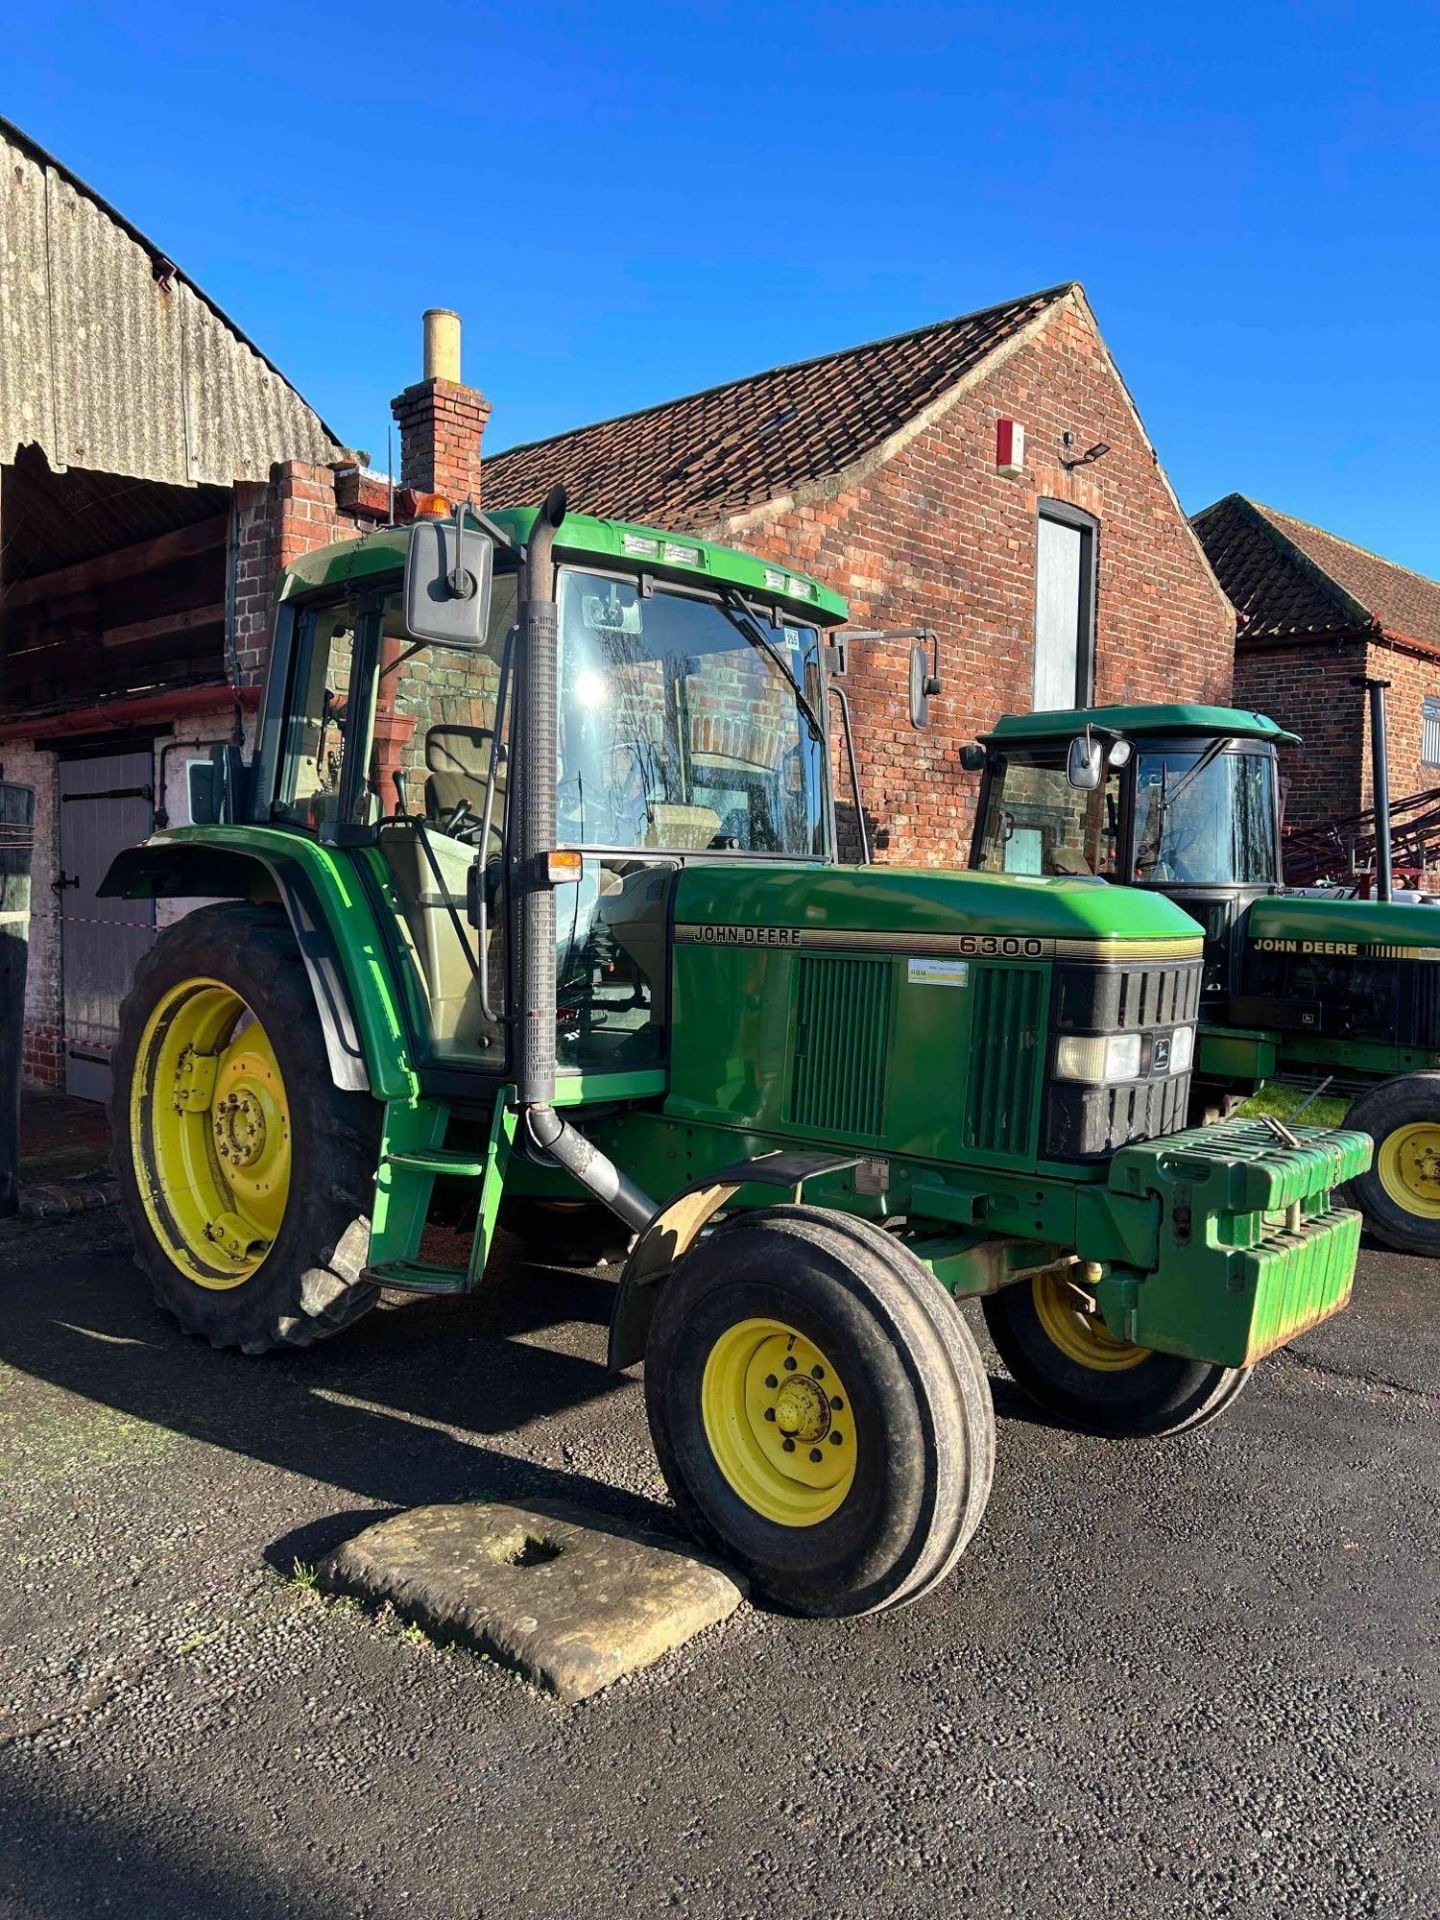 1993 John Deere 6300 Power Quad tractor on 10.0-16 front and 13.6r38 rear wheels and tyres. On farm - Image 16 of 17